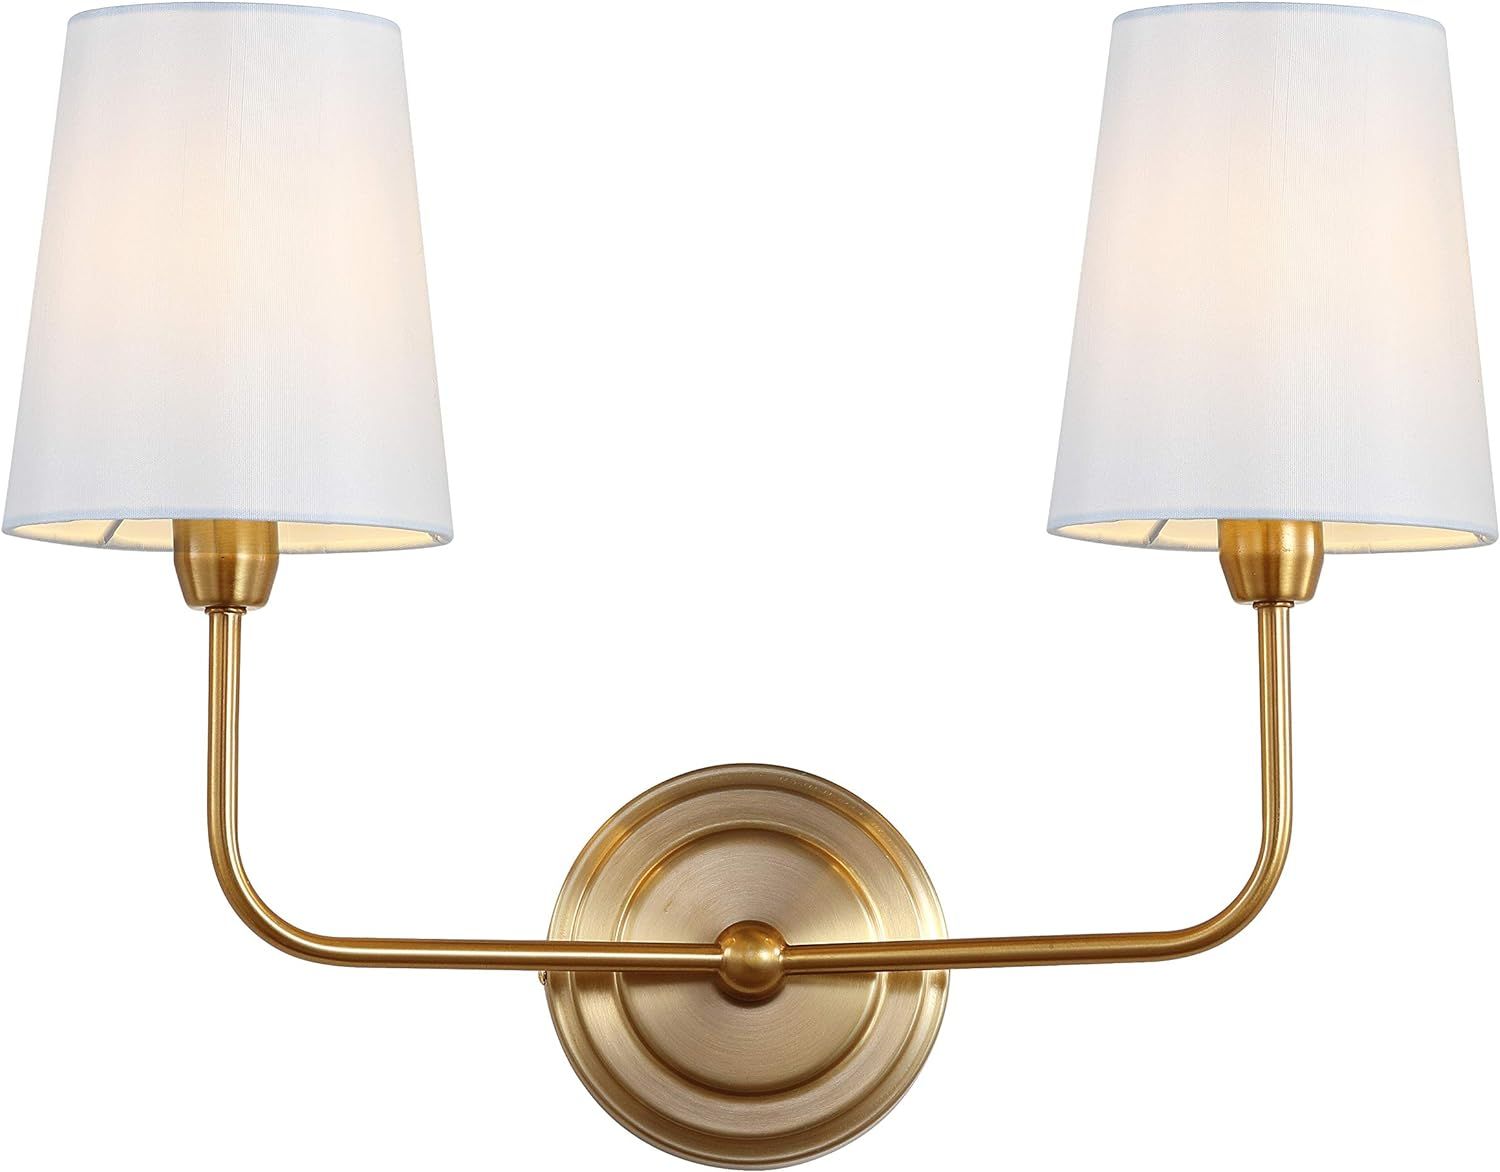 Safavieh SCN4015A Ezra Brass Gold 2-Light Wall (LED Bulbs Included) Sconce, White | Amazon (US)